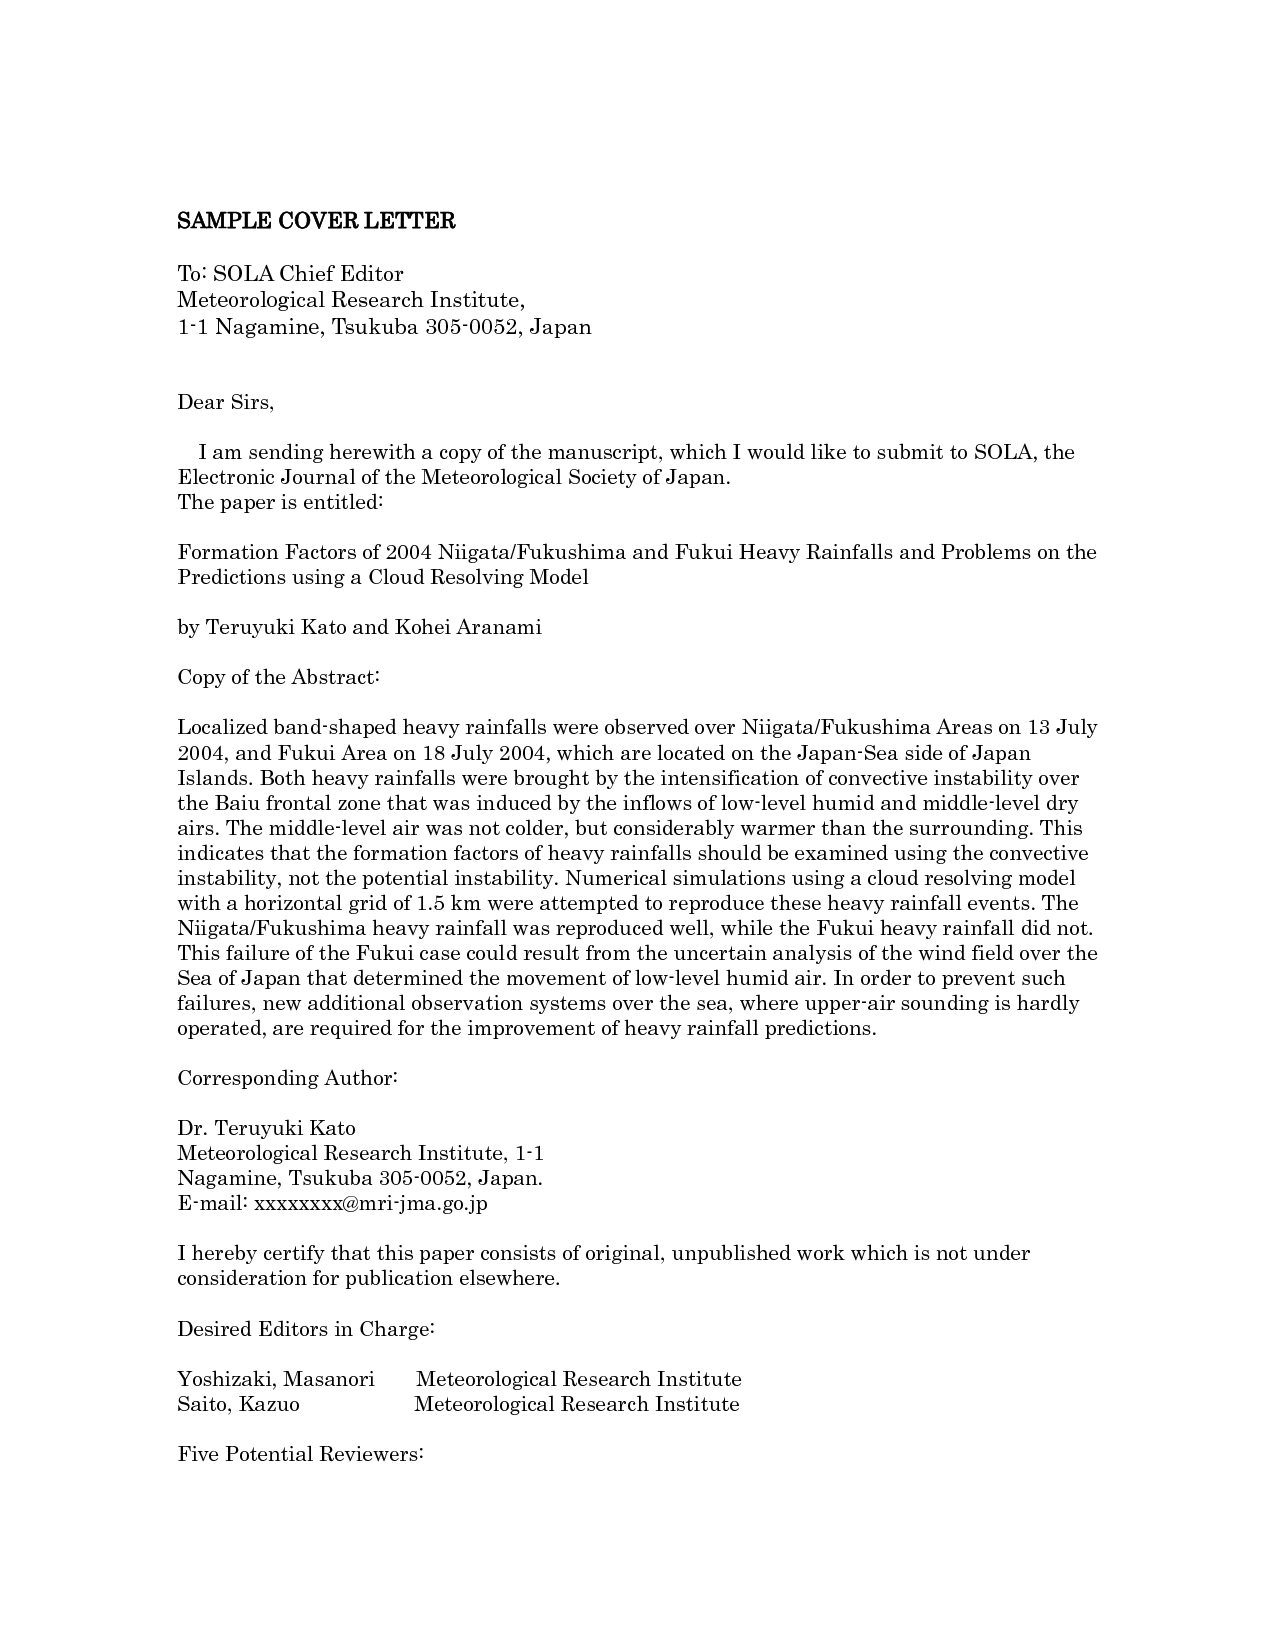 cover letter template article submission